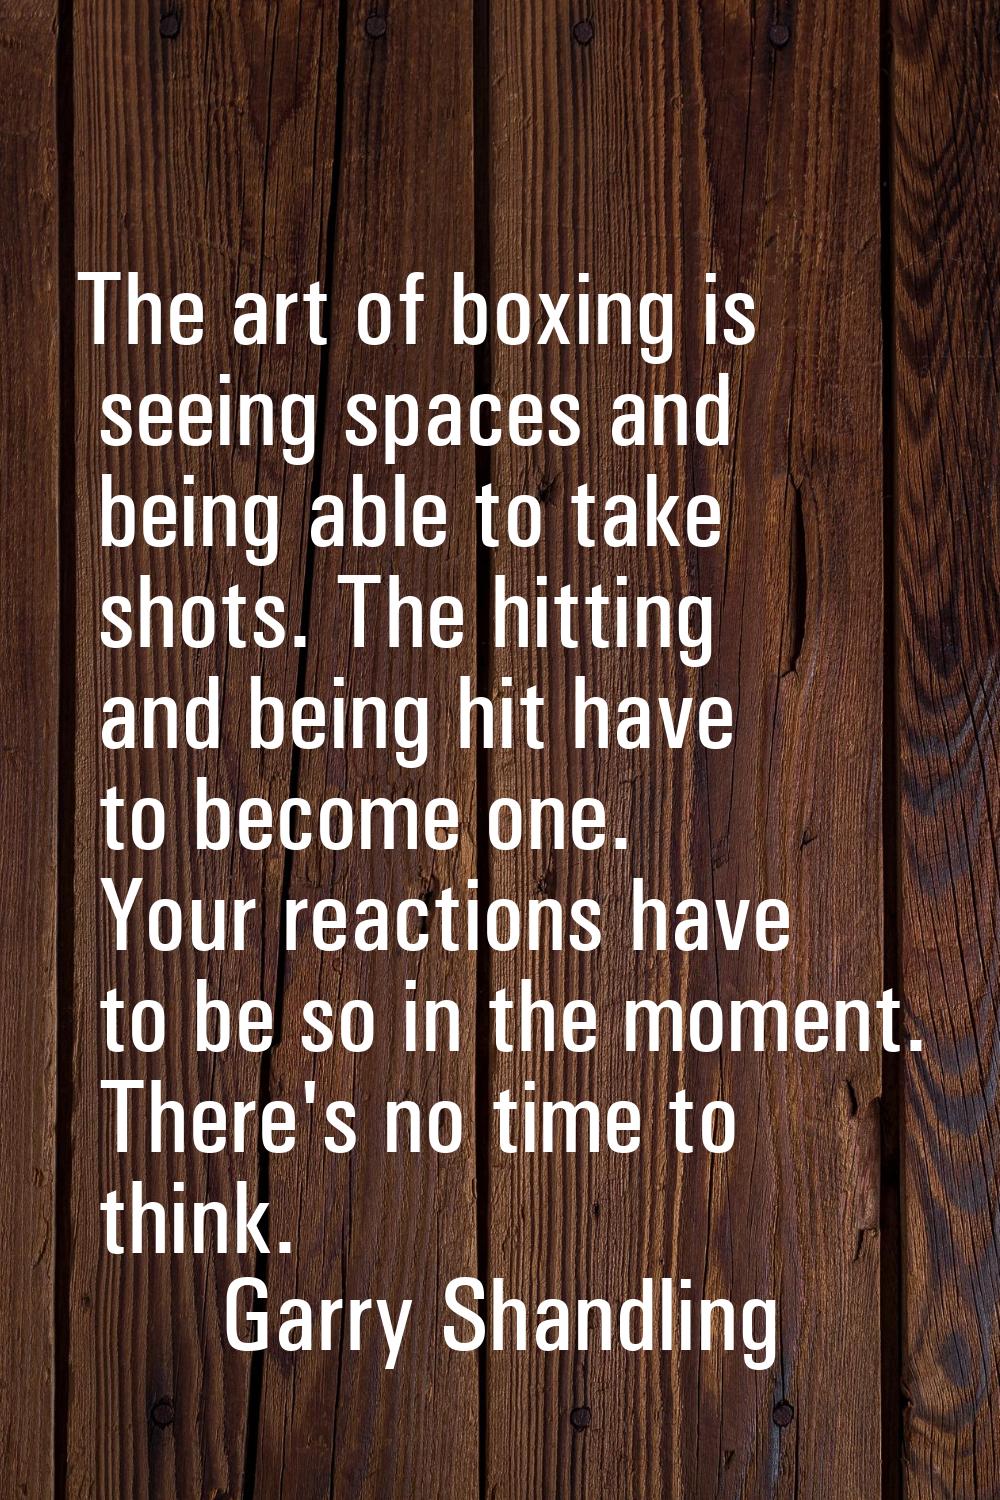 The art of boxing is seeing spaces and being able to take shots. The hitting and being hit have to 